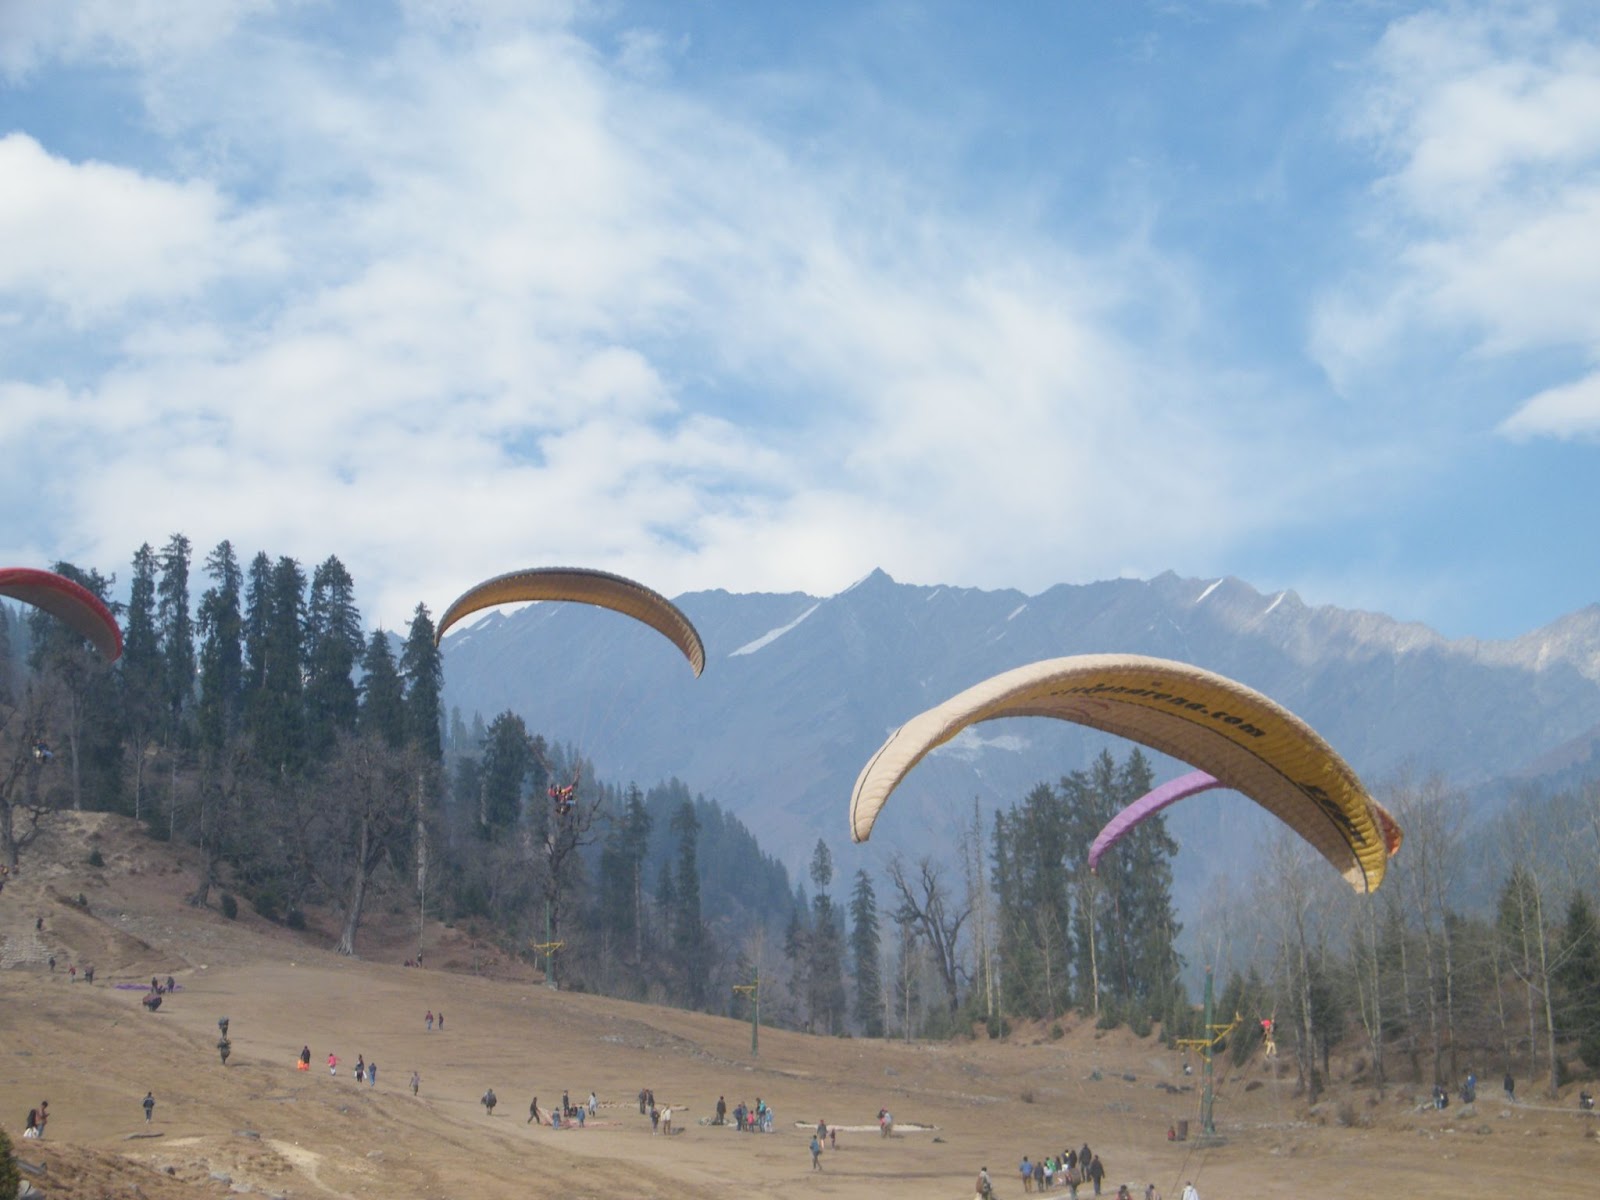 Paragliding
Best activities to do in India